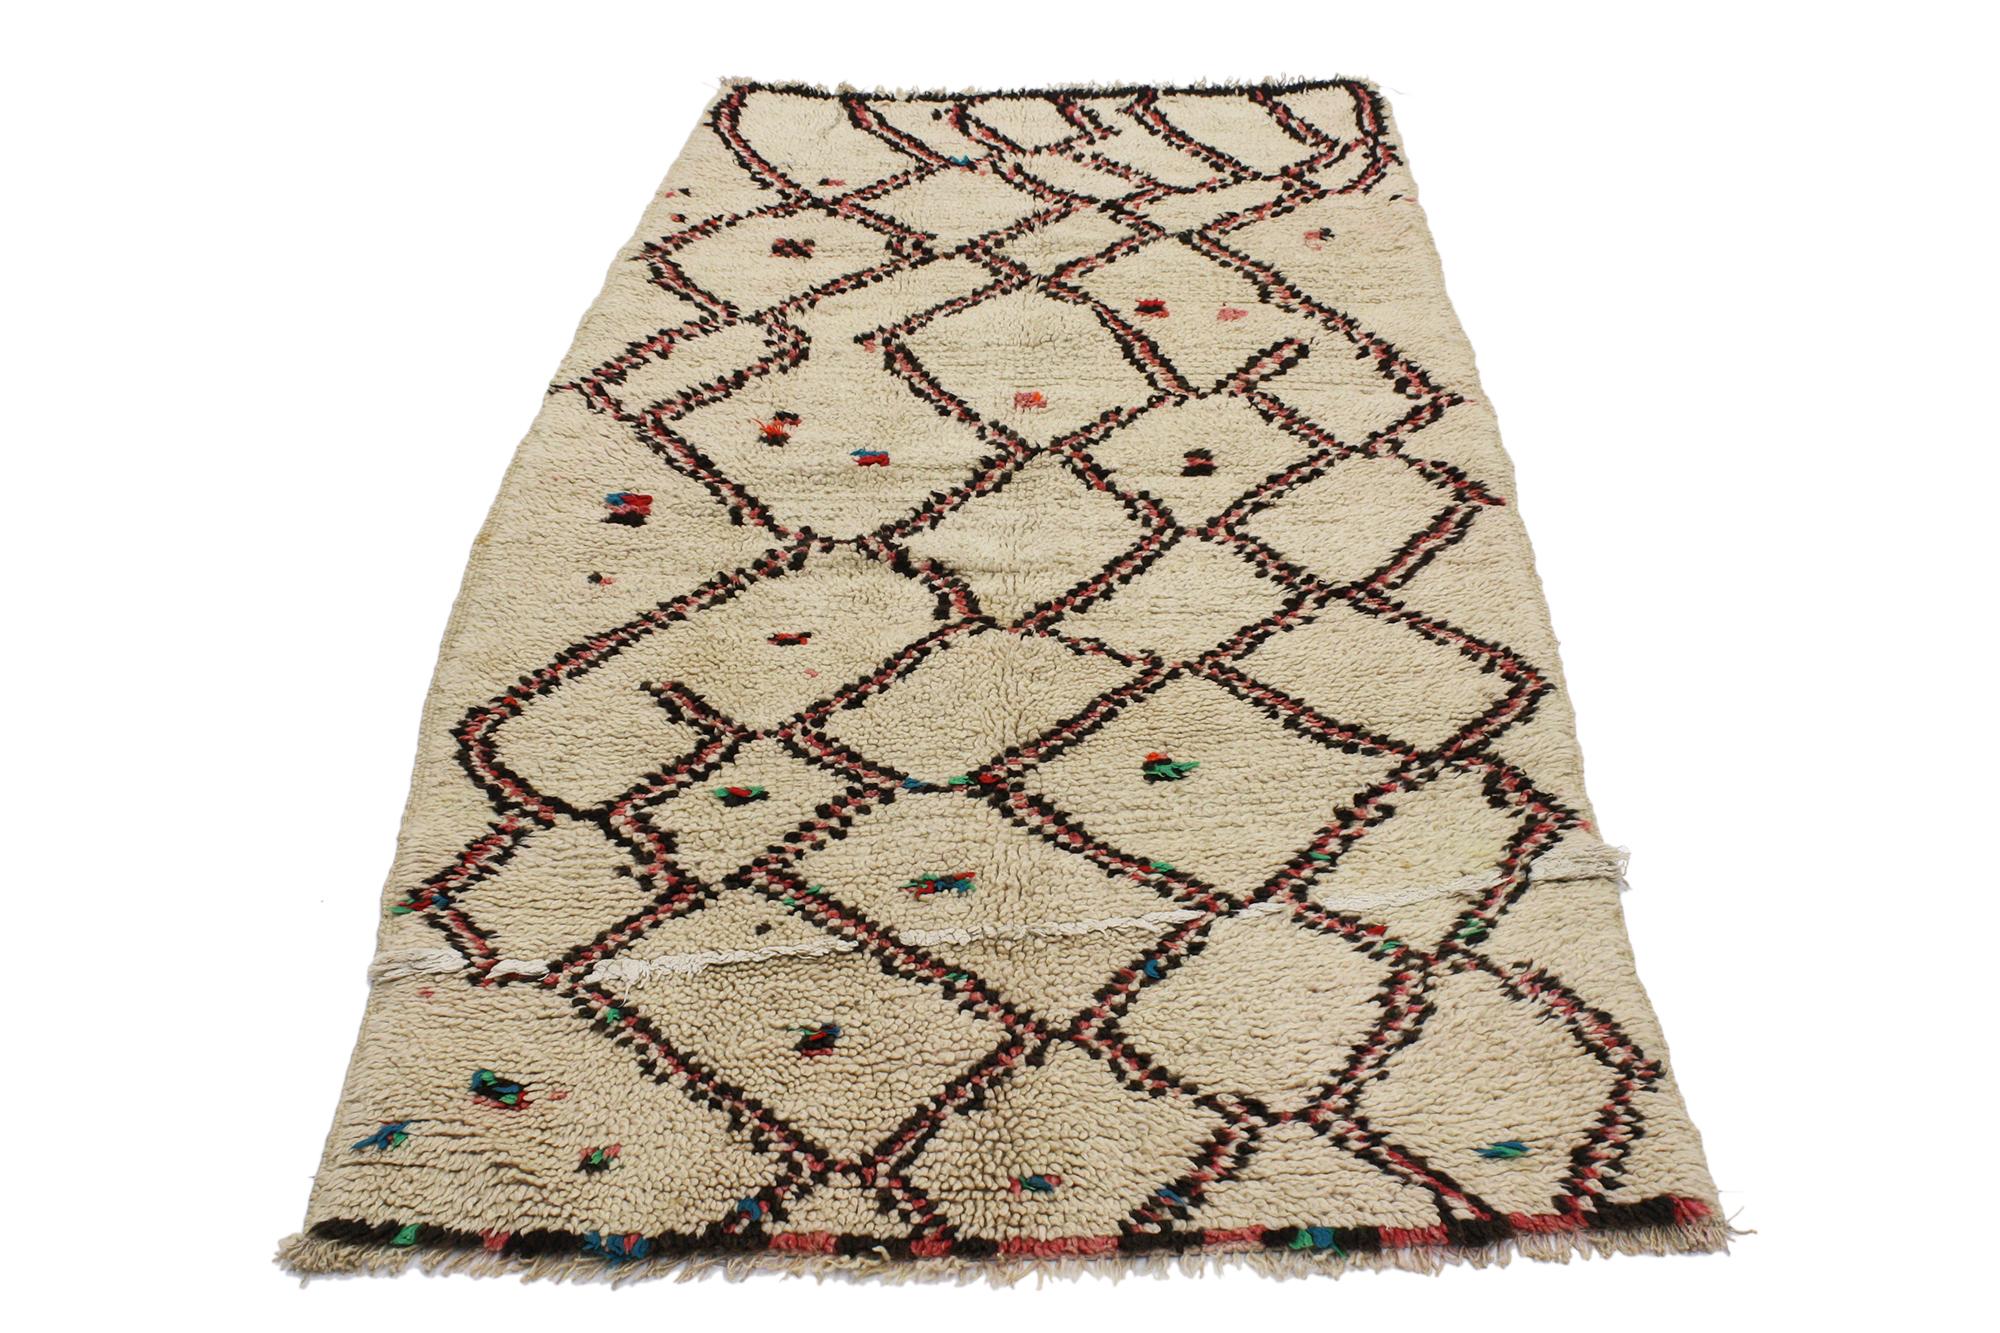 Hand-Knotted Vintage Berber Moroccan Azilal Rug, Ait Bou Ichaouen Talsint Carpet For Sale